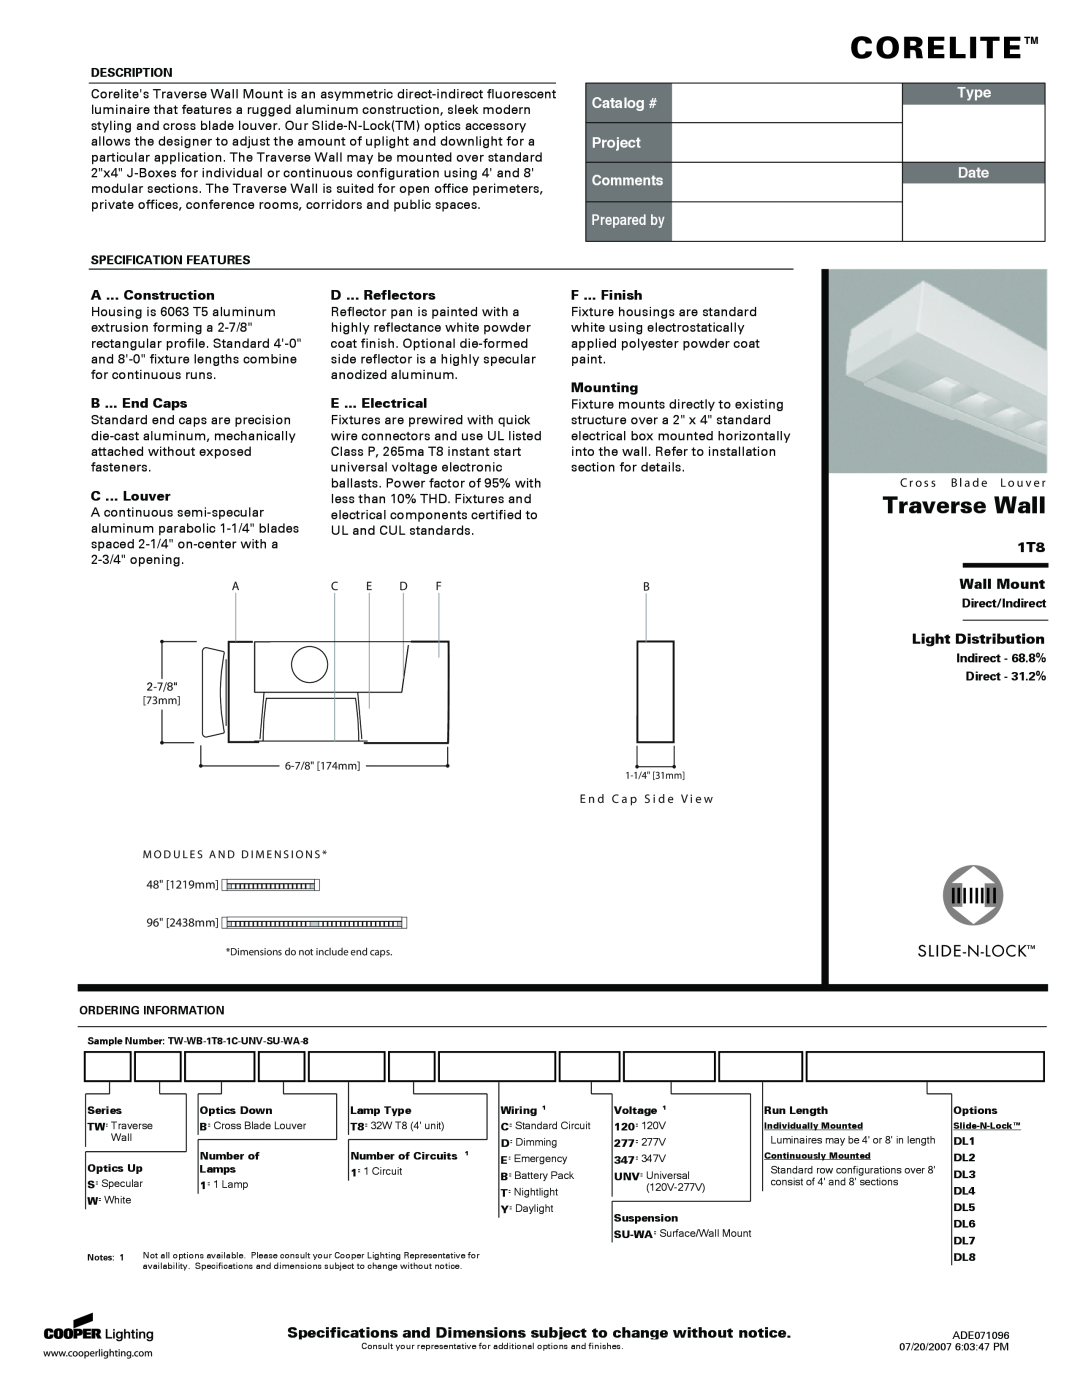 Cooper Lighting specifications 1T8 Wall Mount, Light Distribution, Corelite, Traverse Wall, Catalog #, Project Comments 